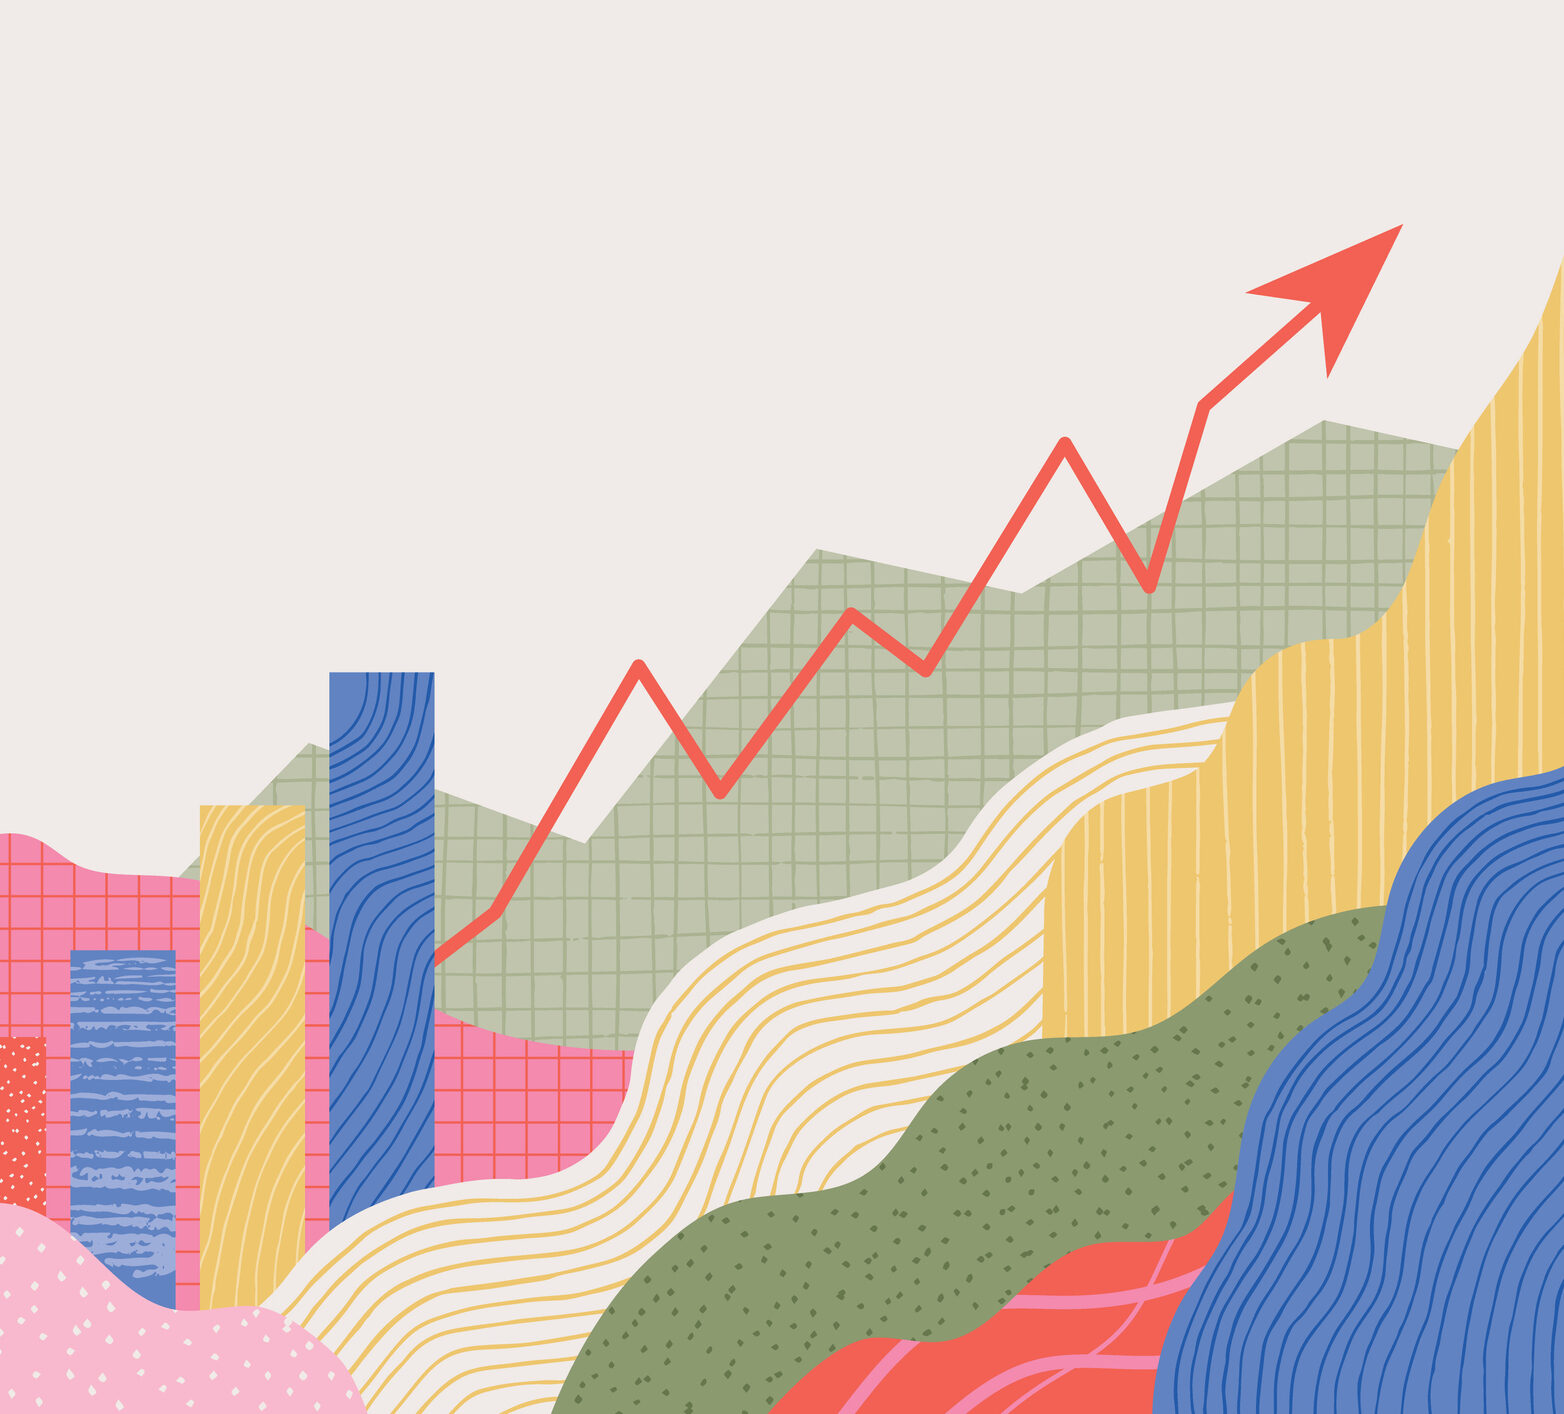 Colorful arrows on a graph trending upwards